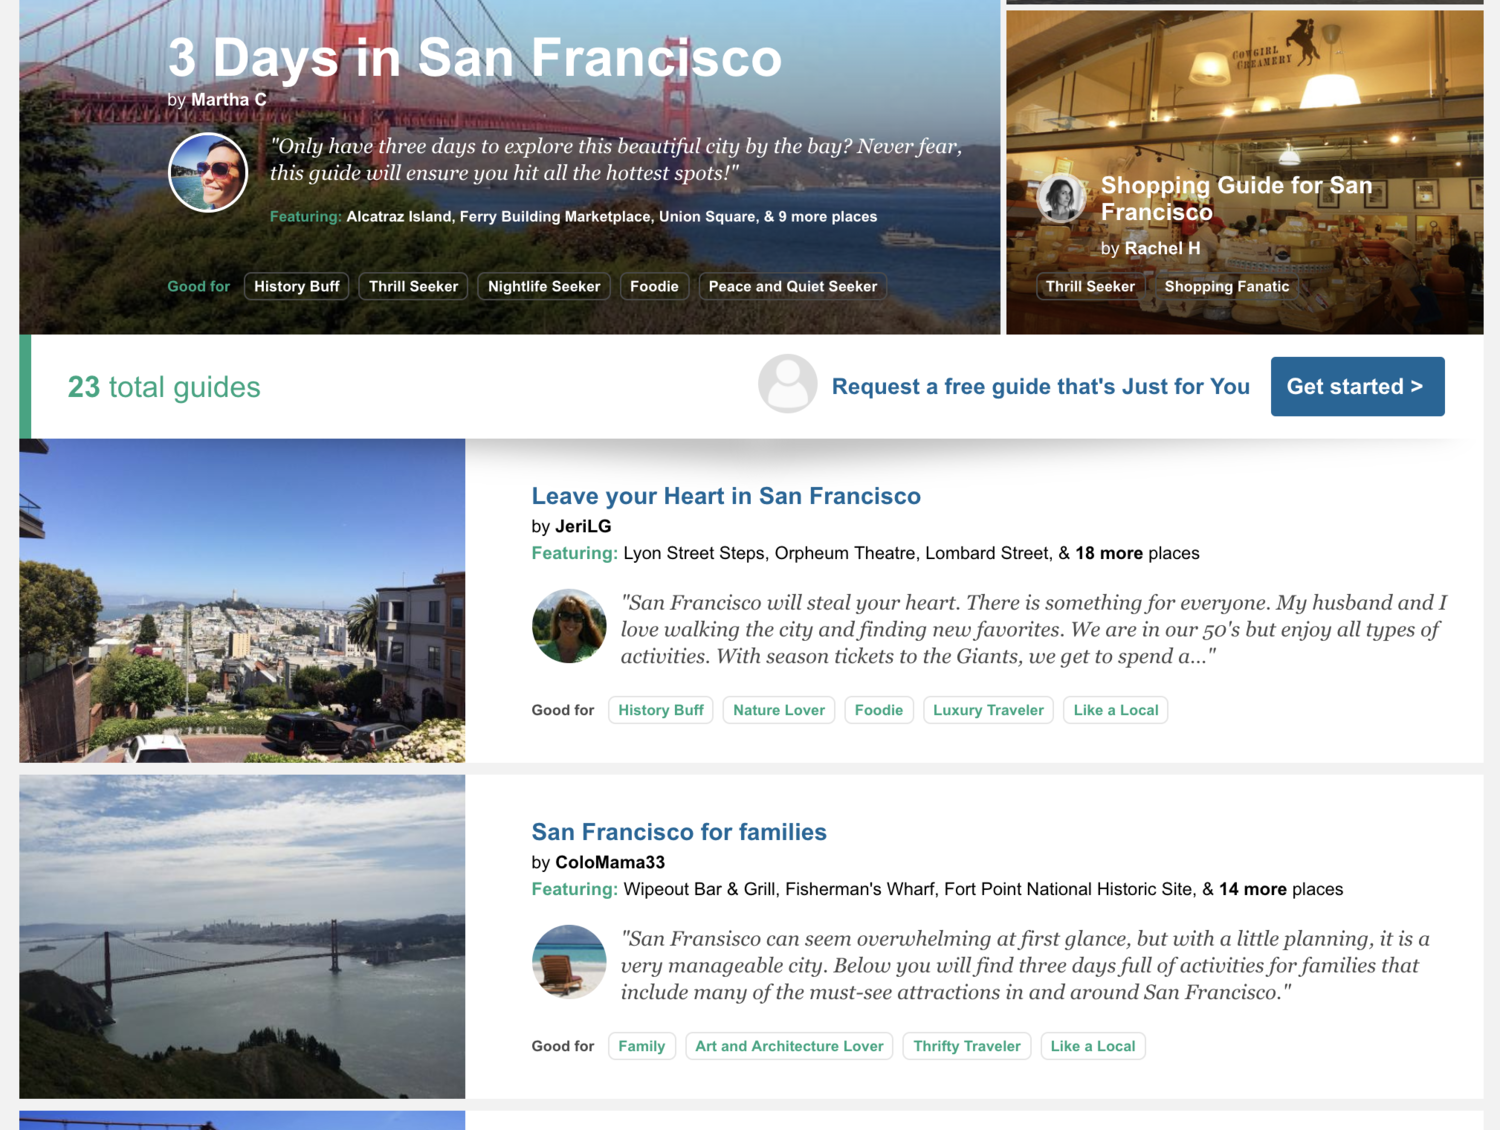  Tripadvisor aggregates top user reviews into guide pages 